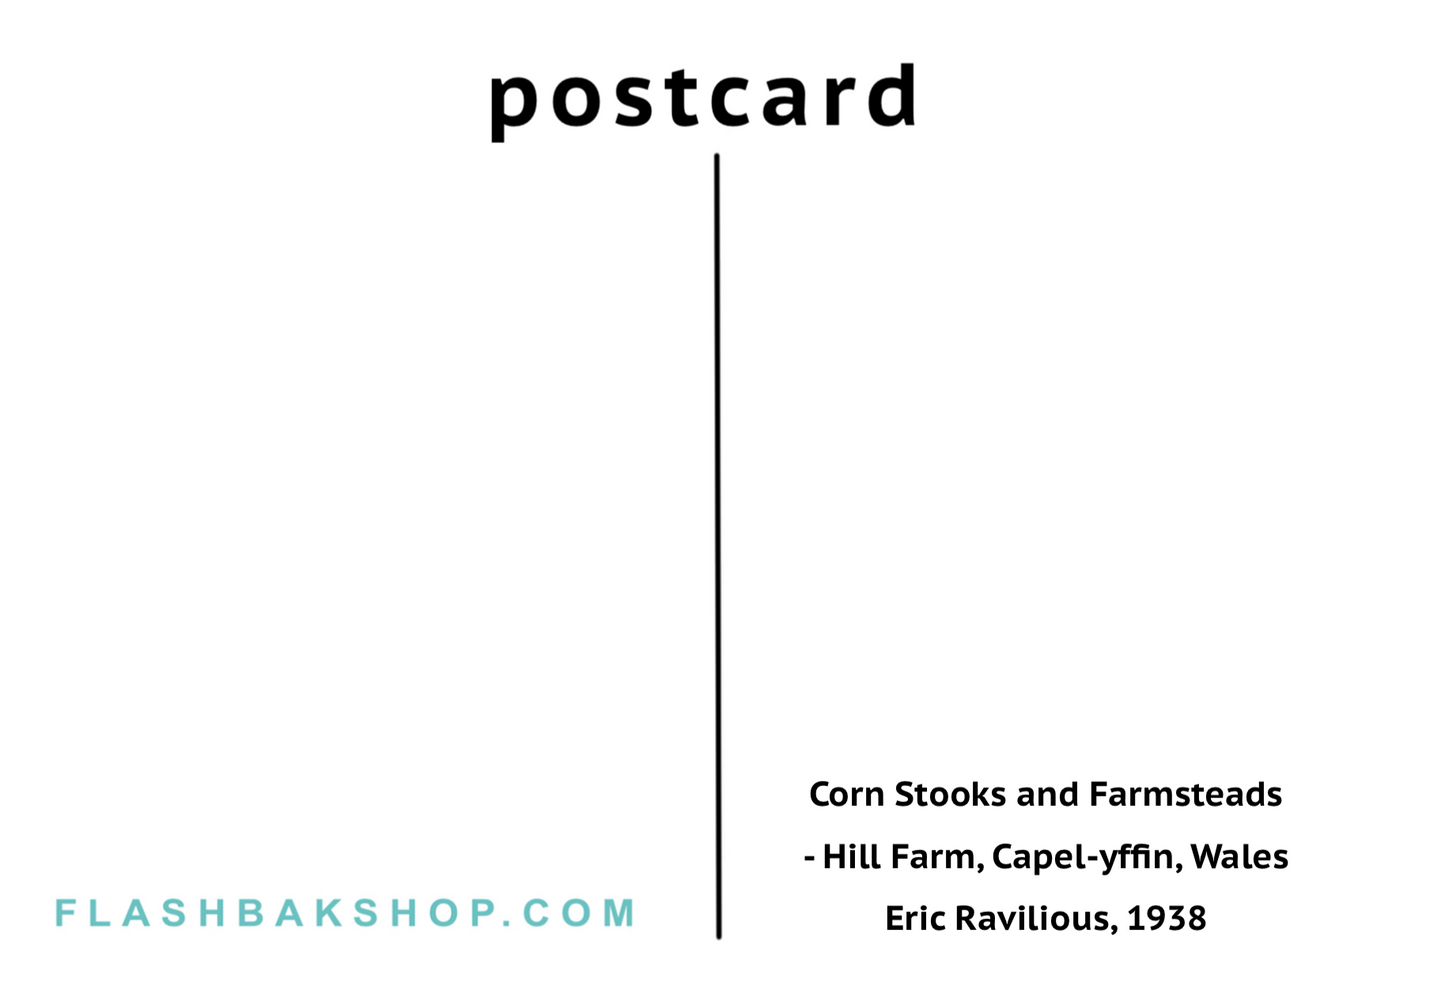 Corn Stooks and Farmsteads by Eric Ravilious, 1938 - Postcard